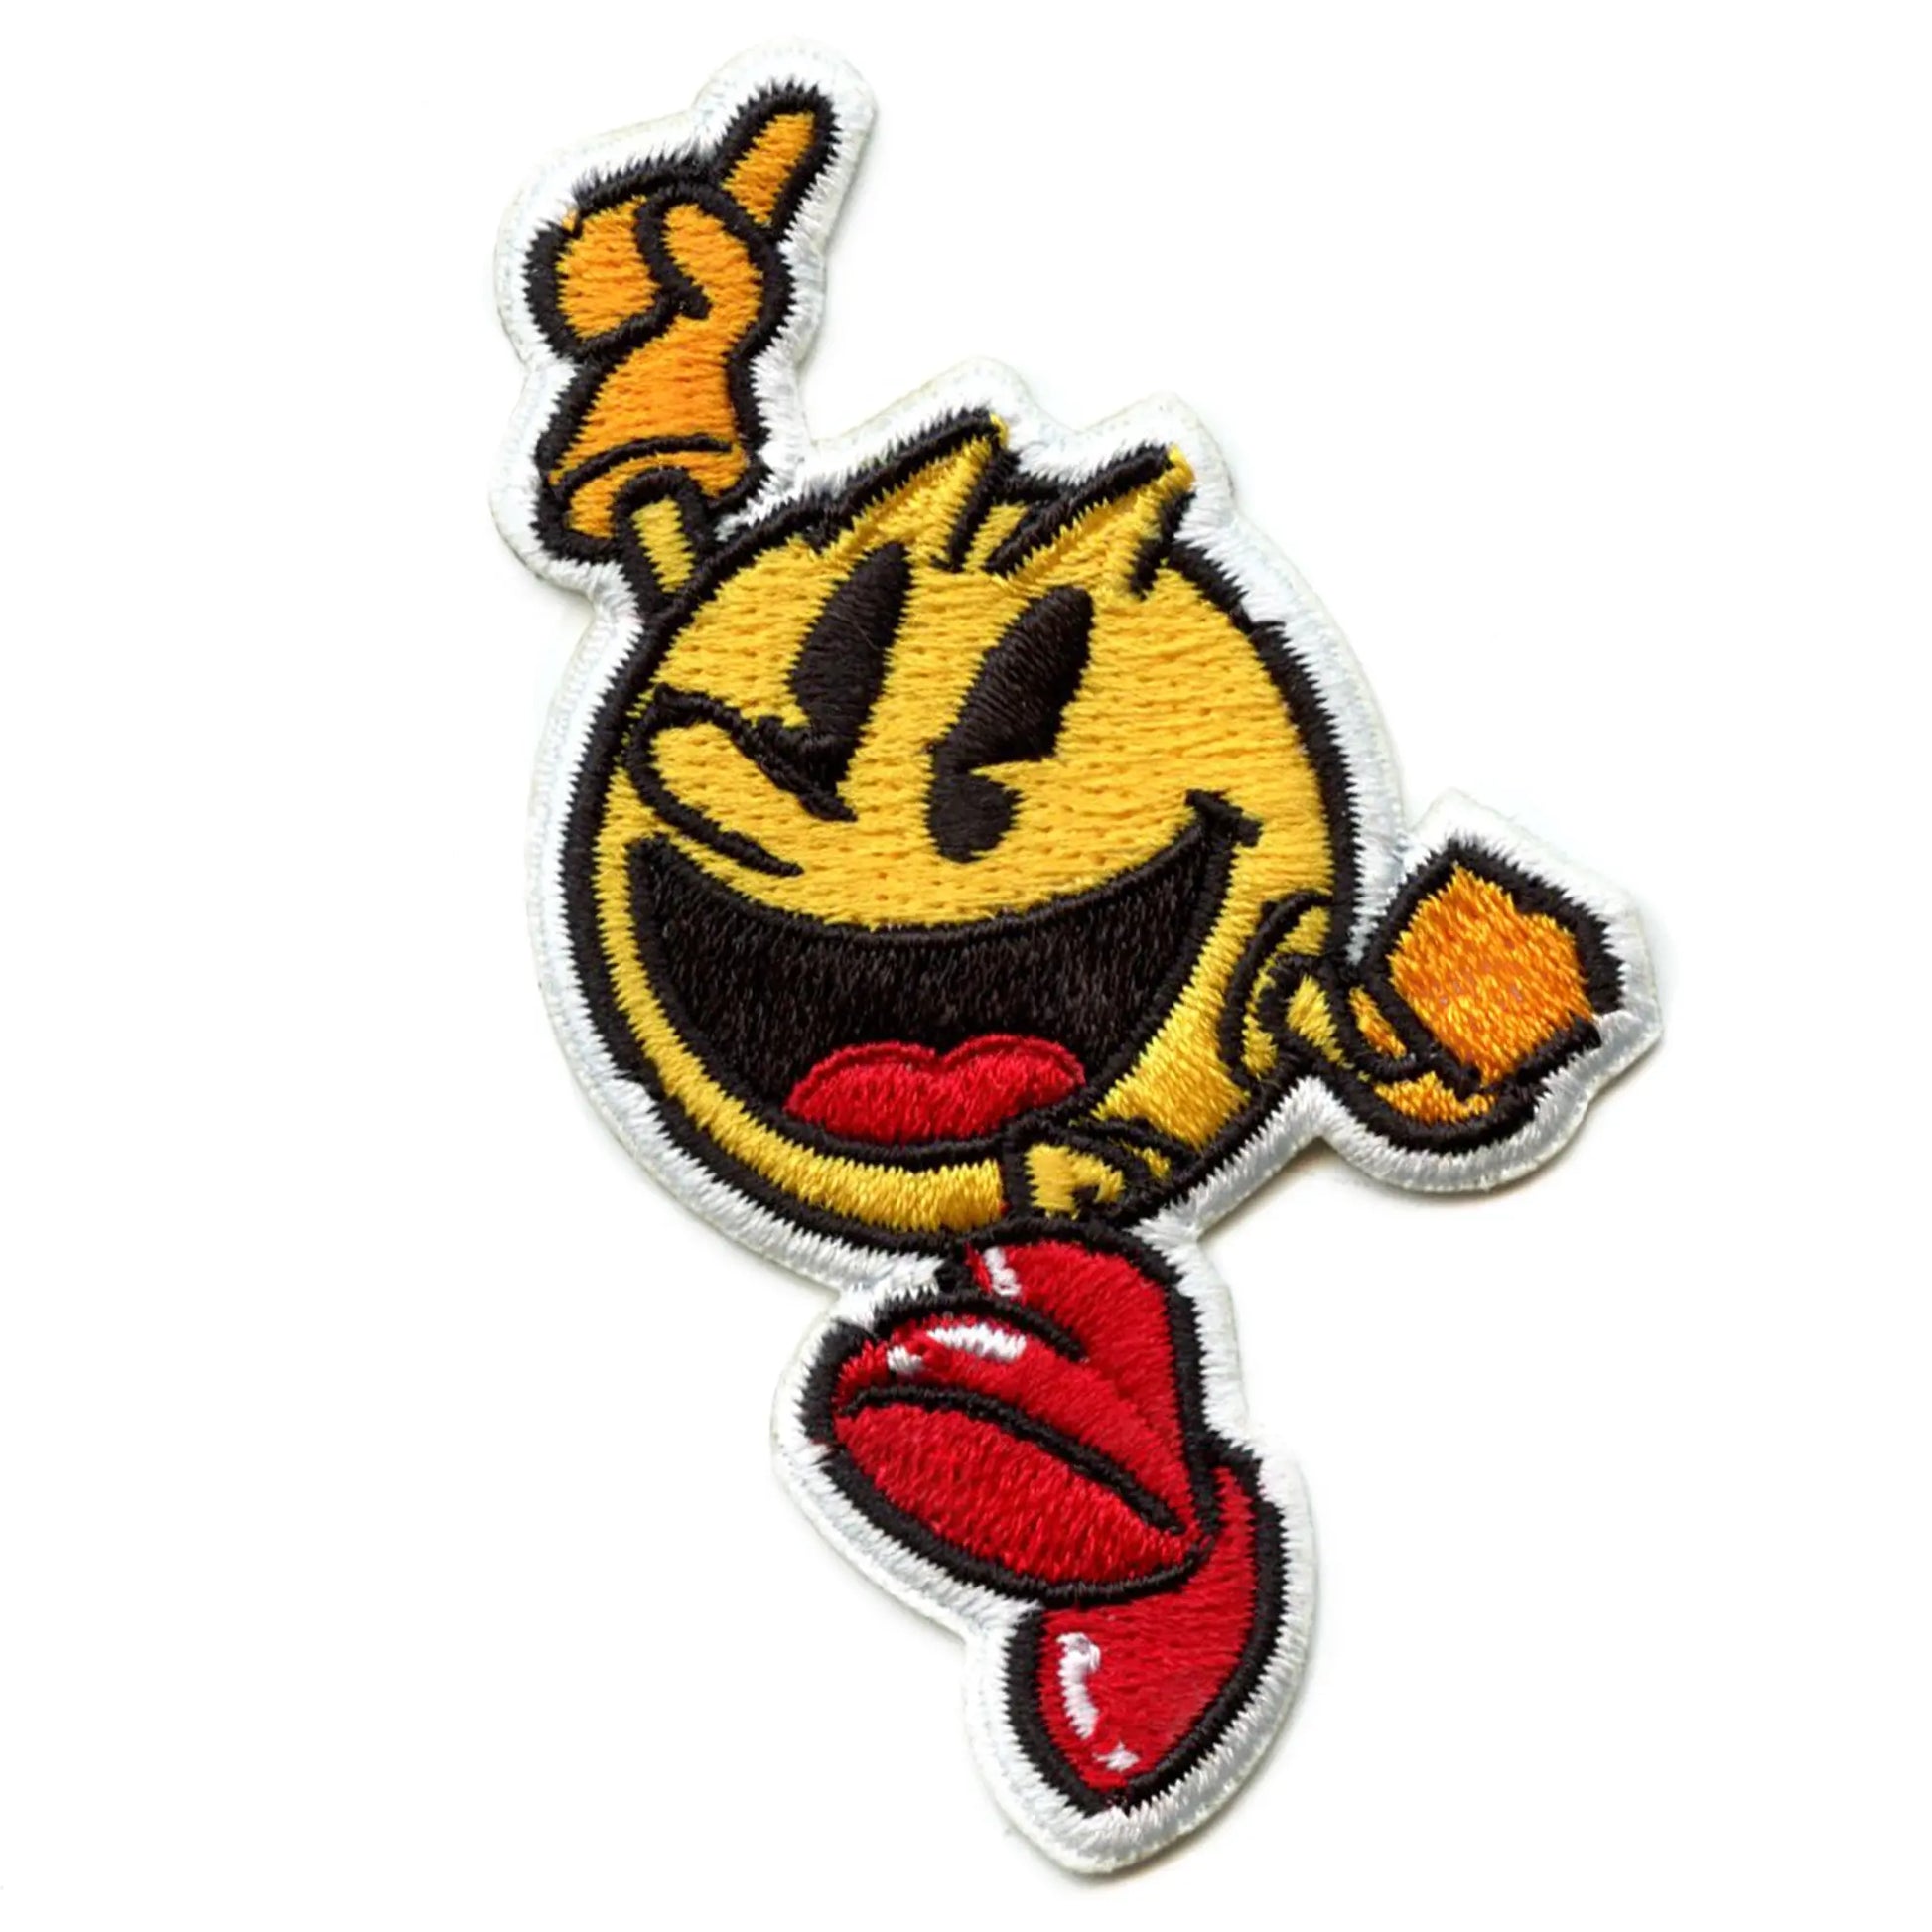 PAC-MAN Classic Illustration Jumping Patch Arcade Gaming Embroidered Iron on